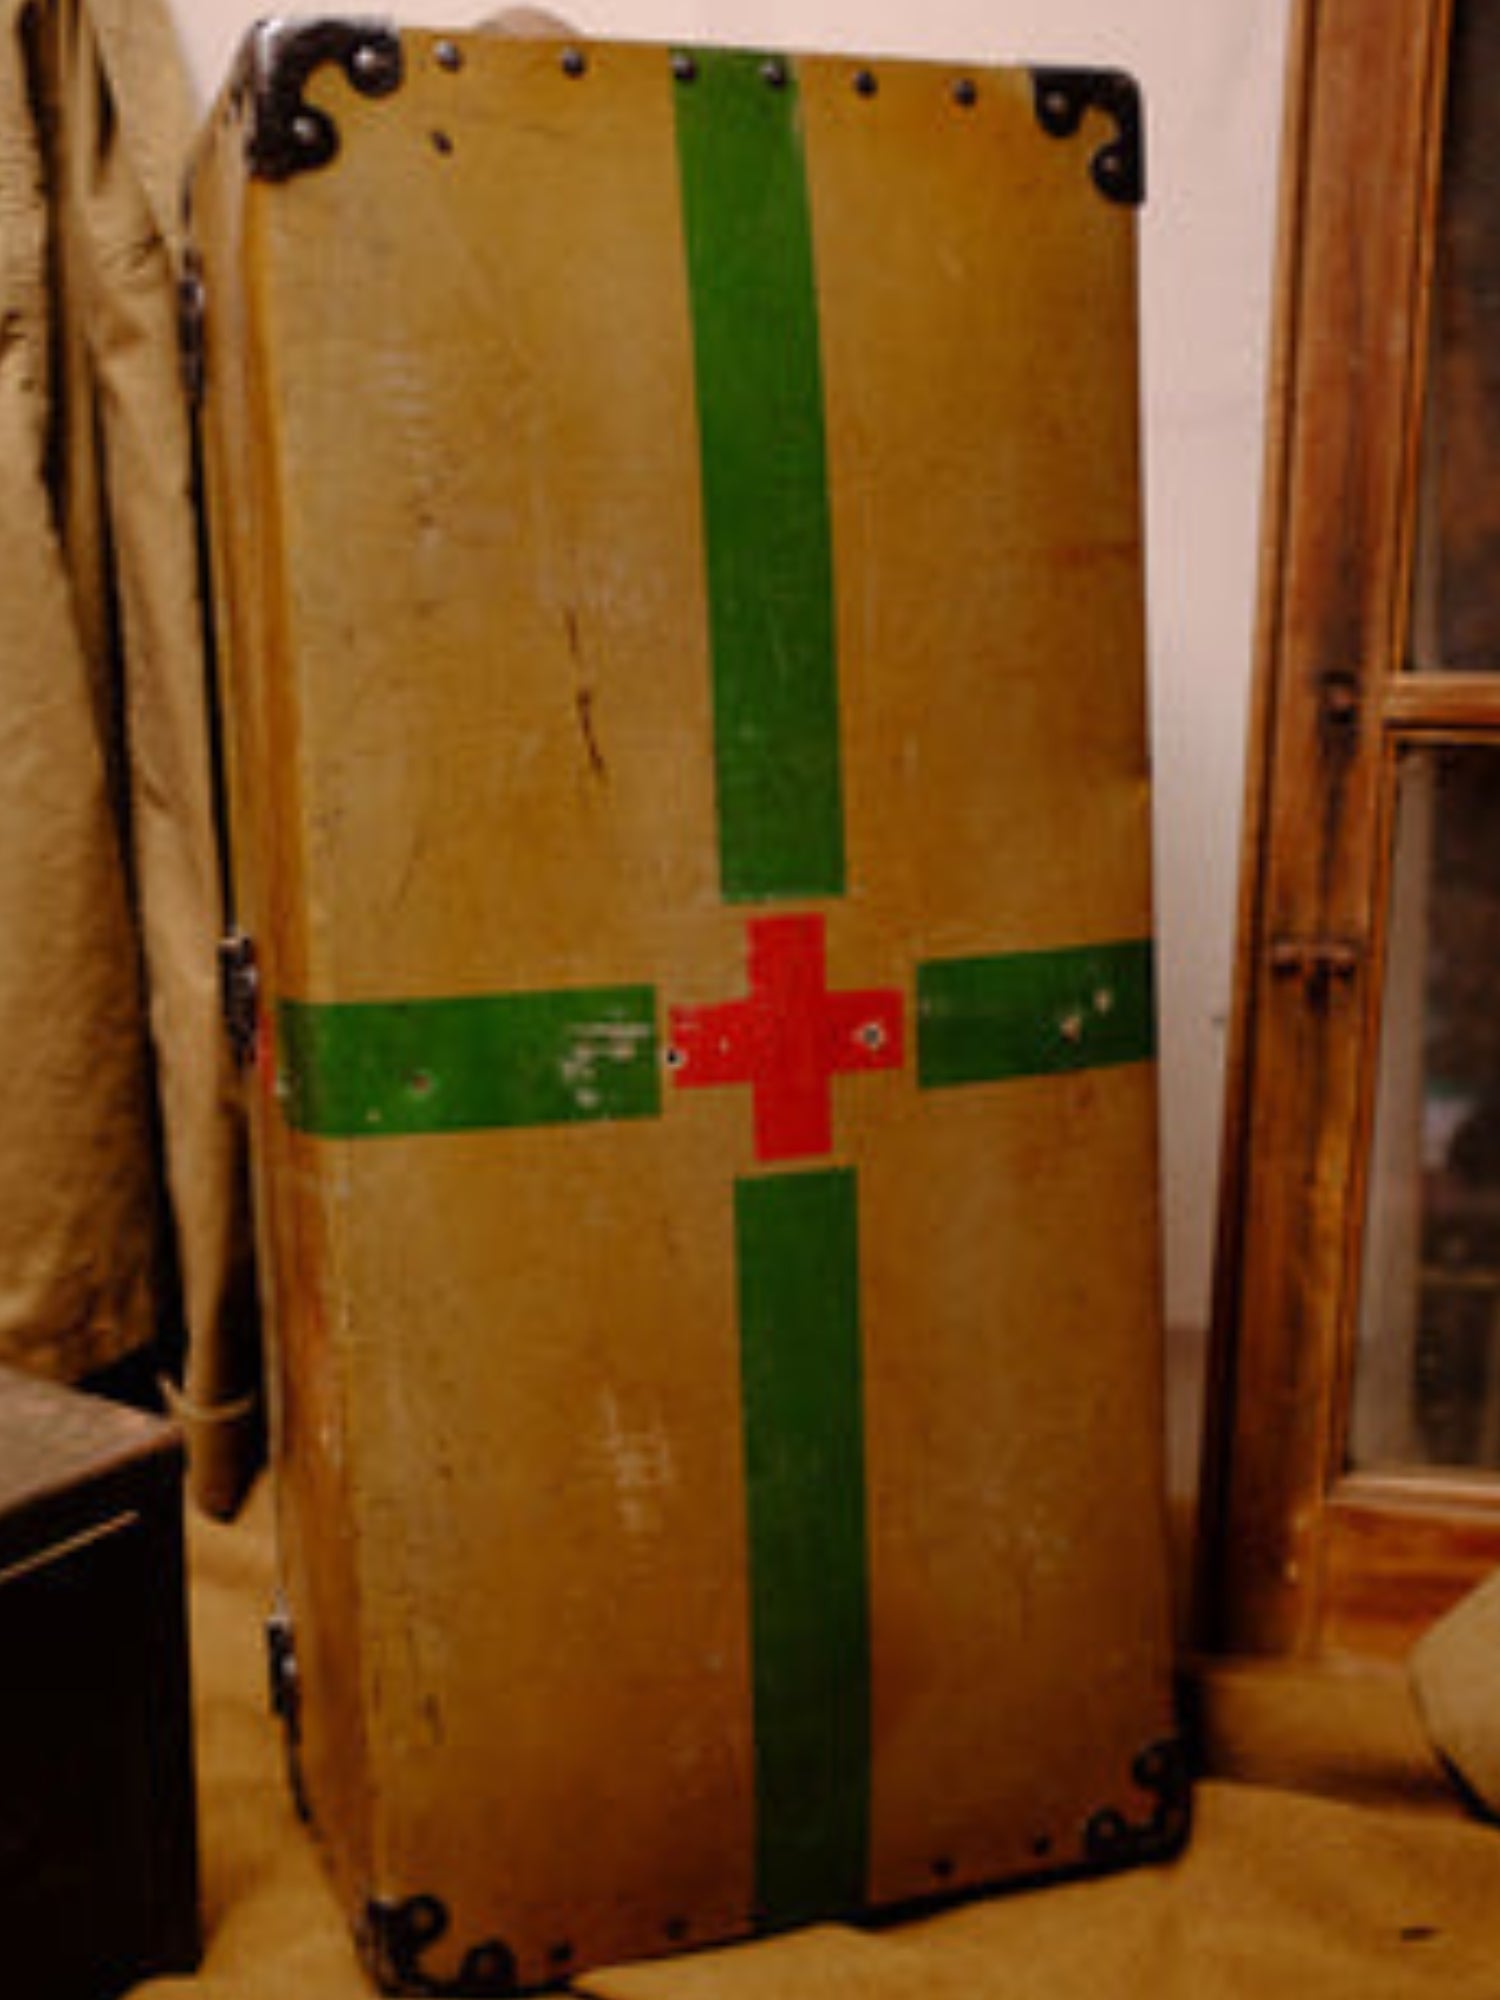 Dr. Henry's Red Cross suitcase